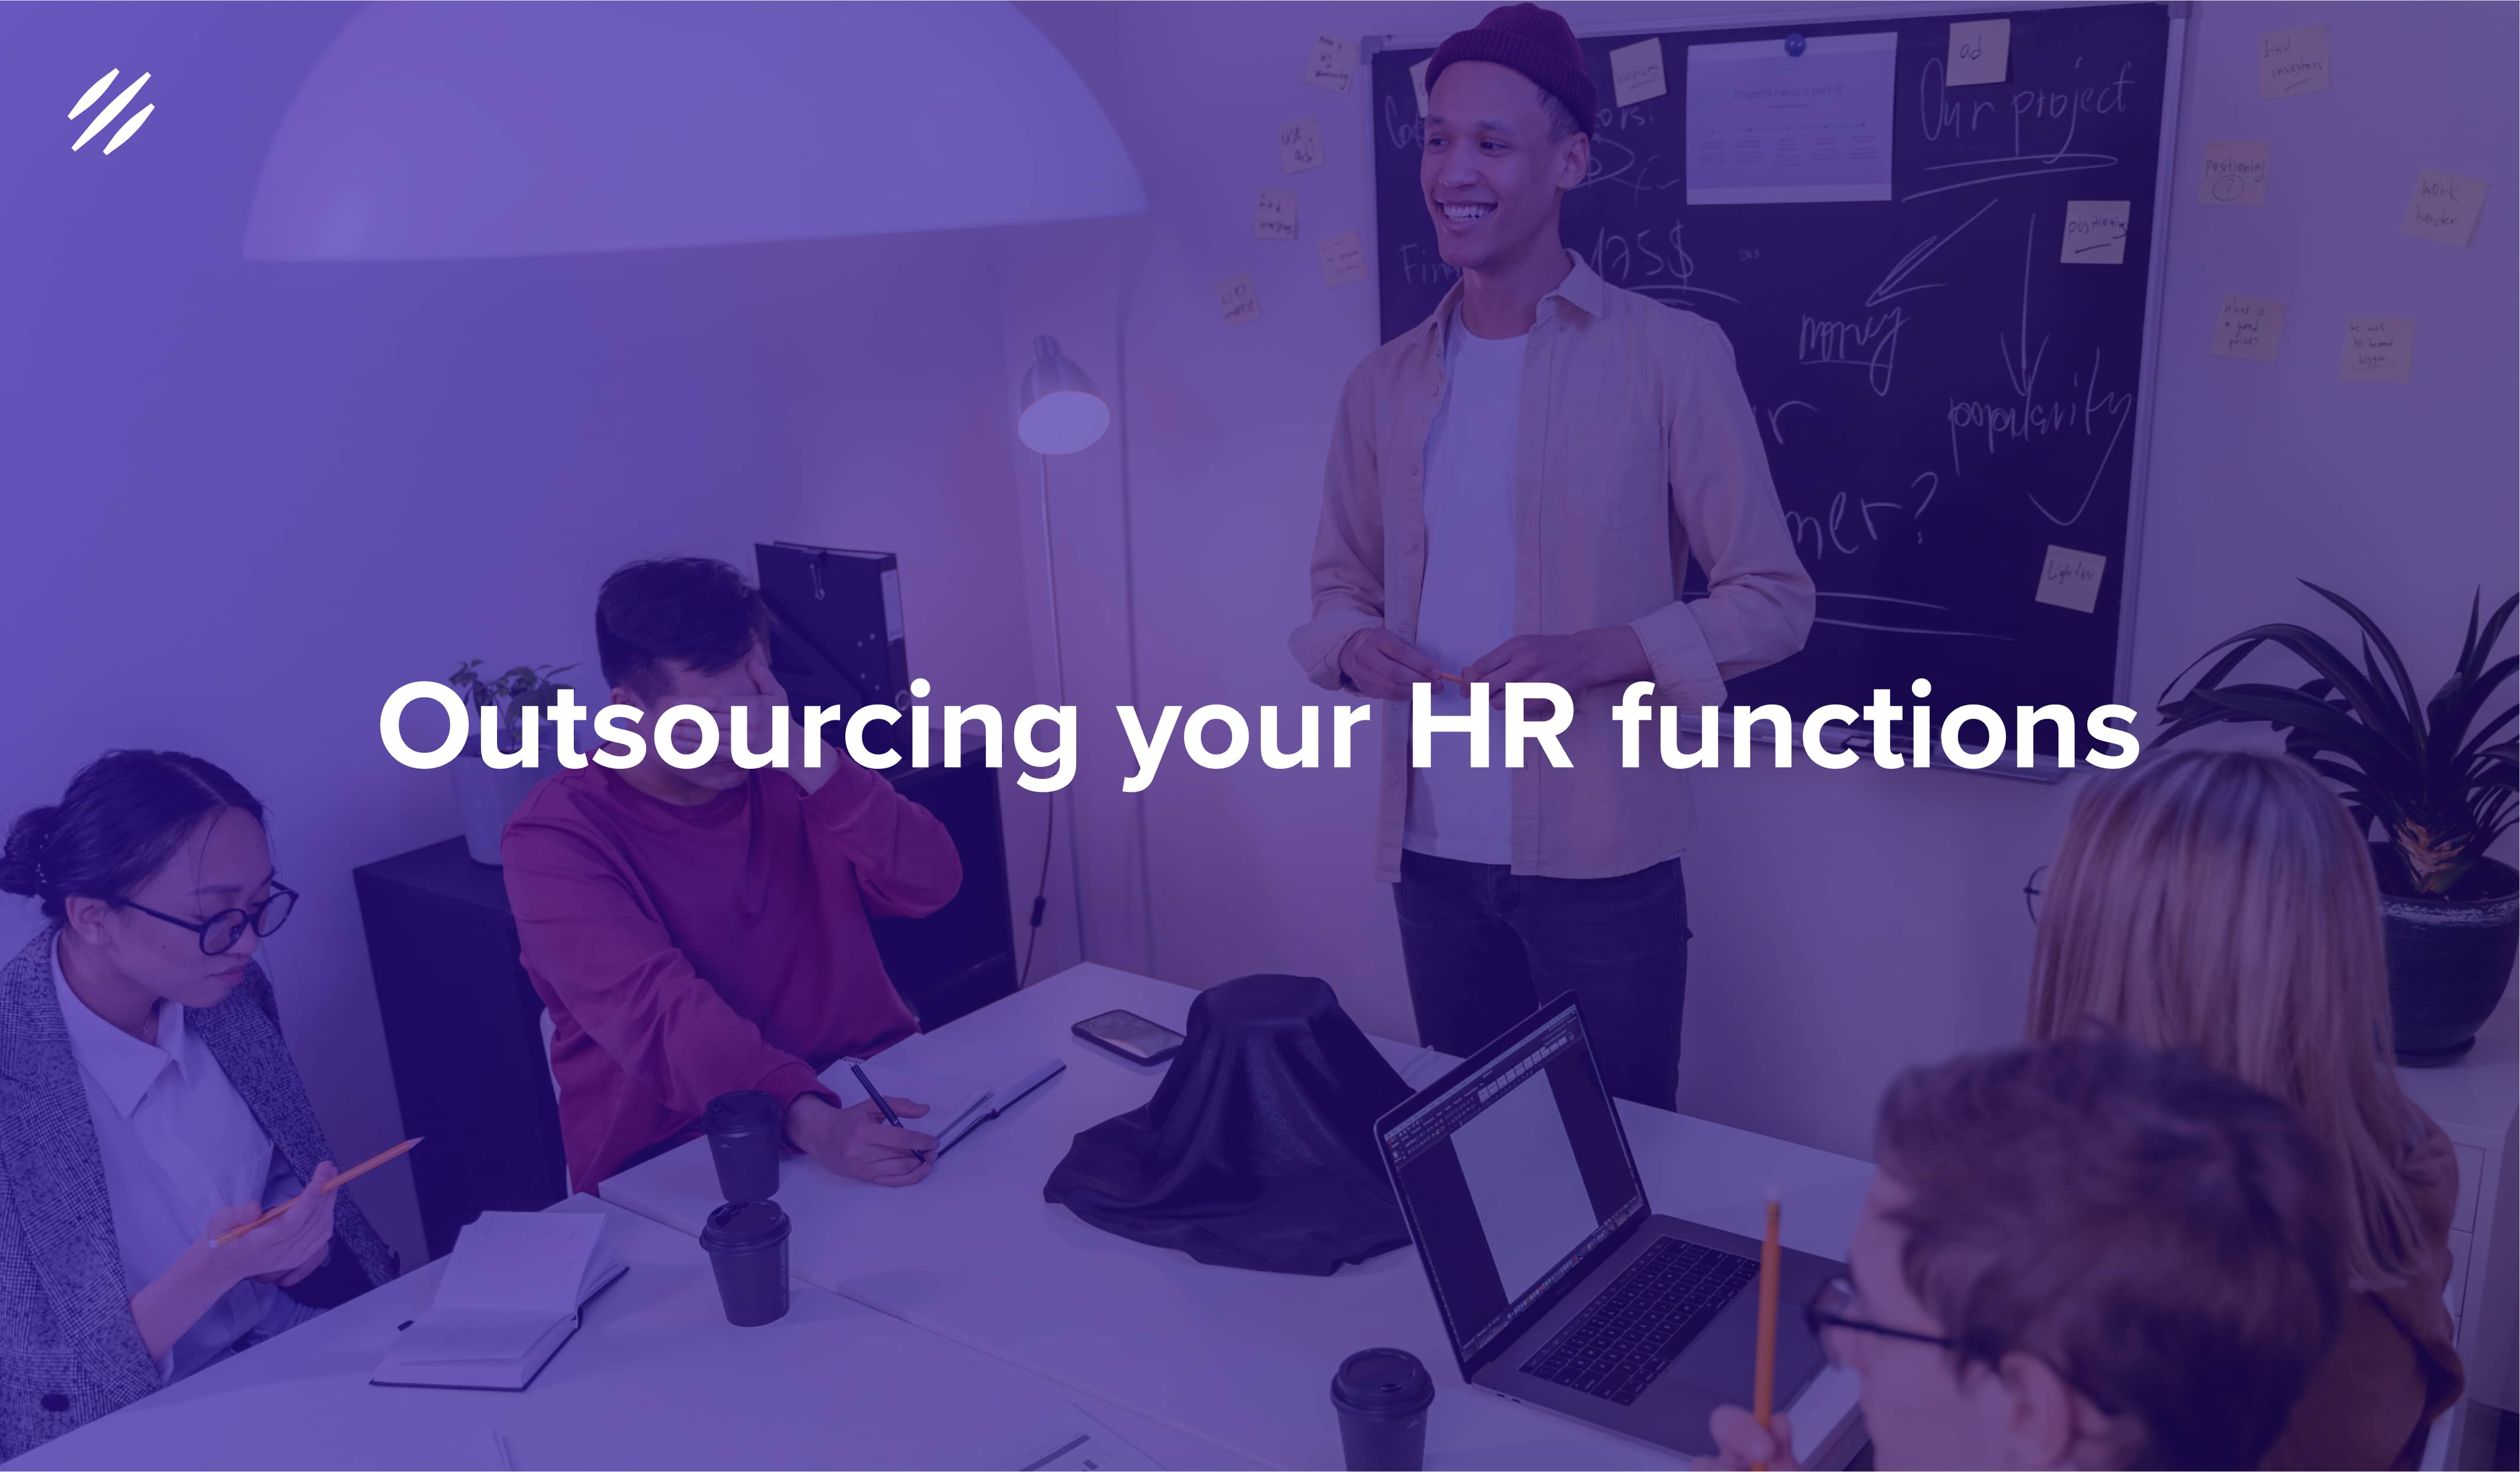 What HR Functions Can Be Outsourced?